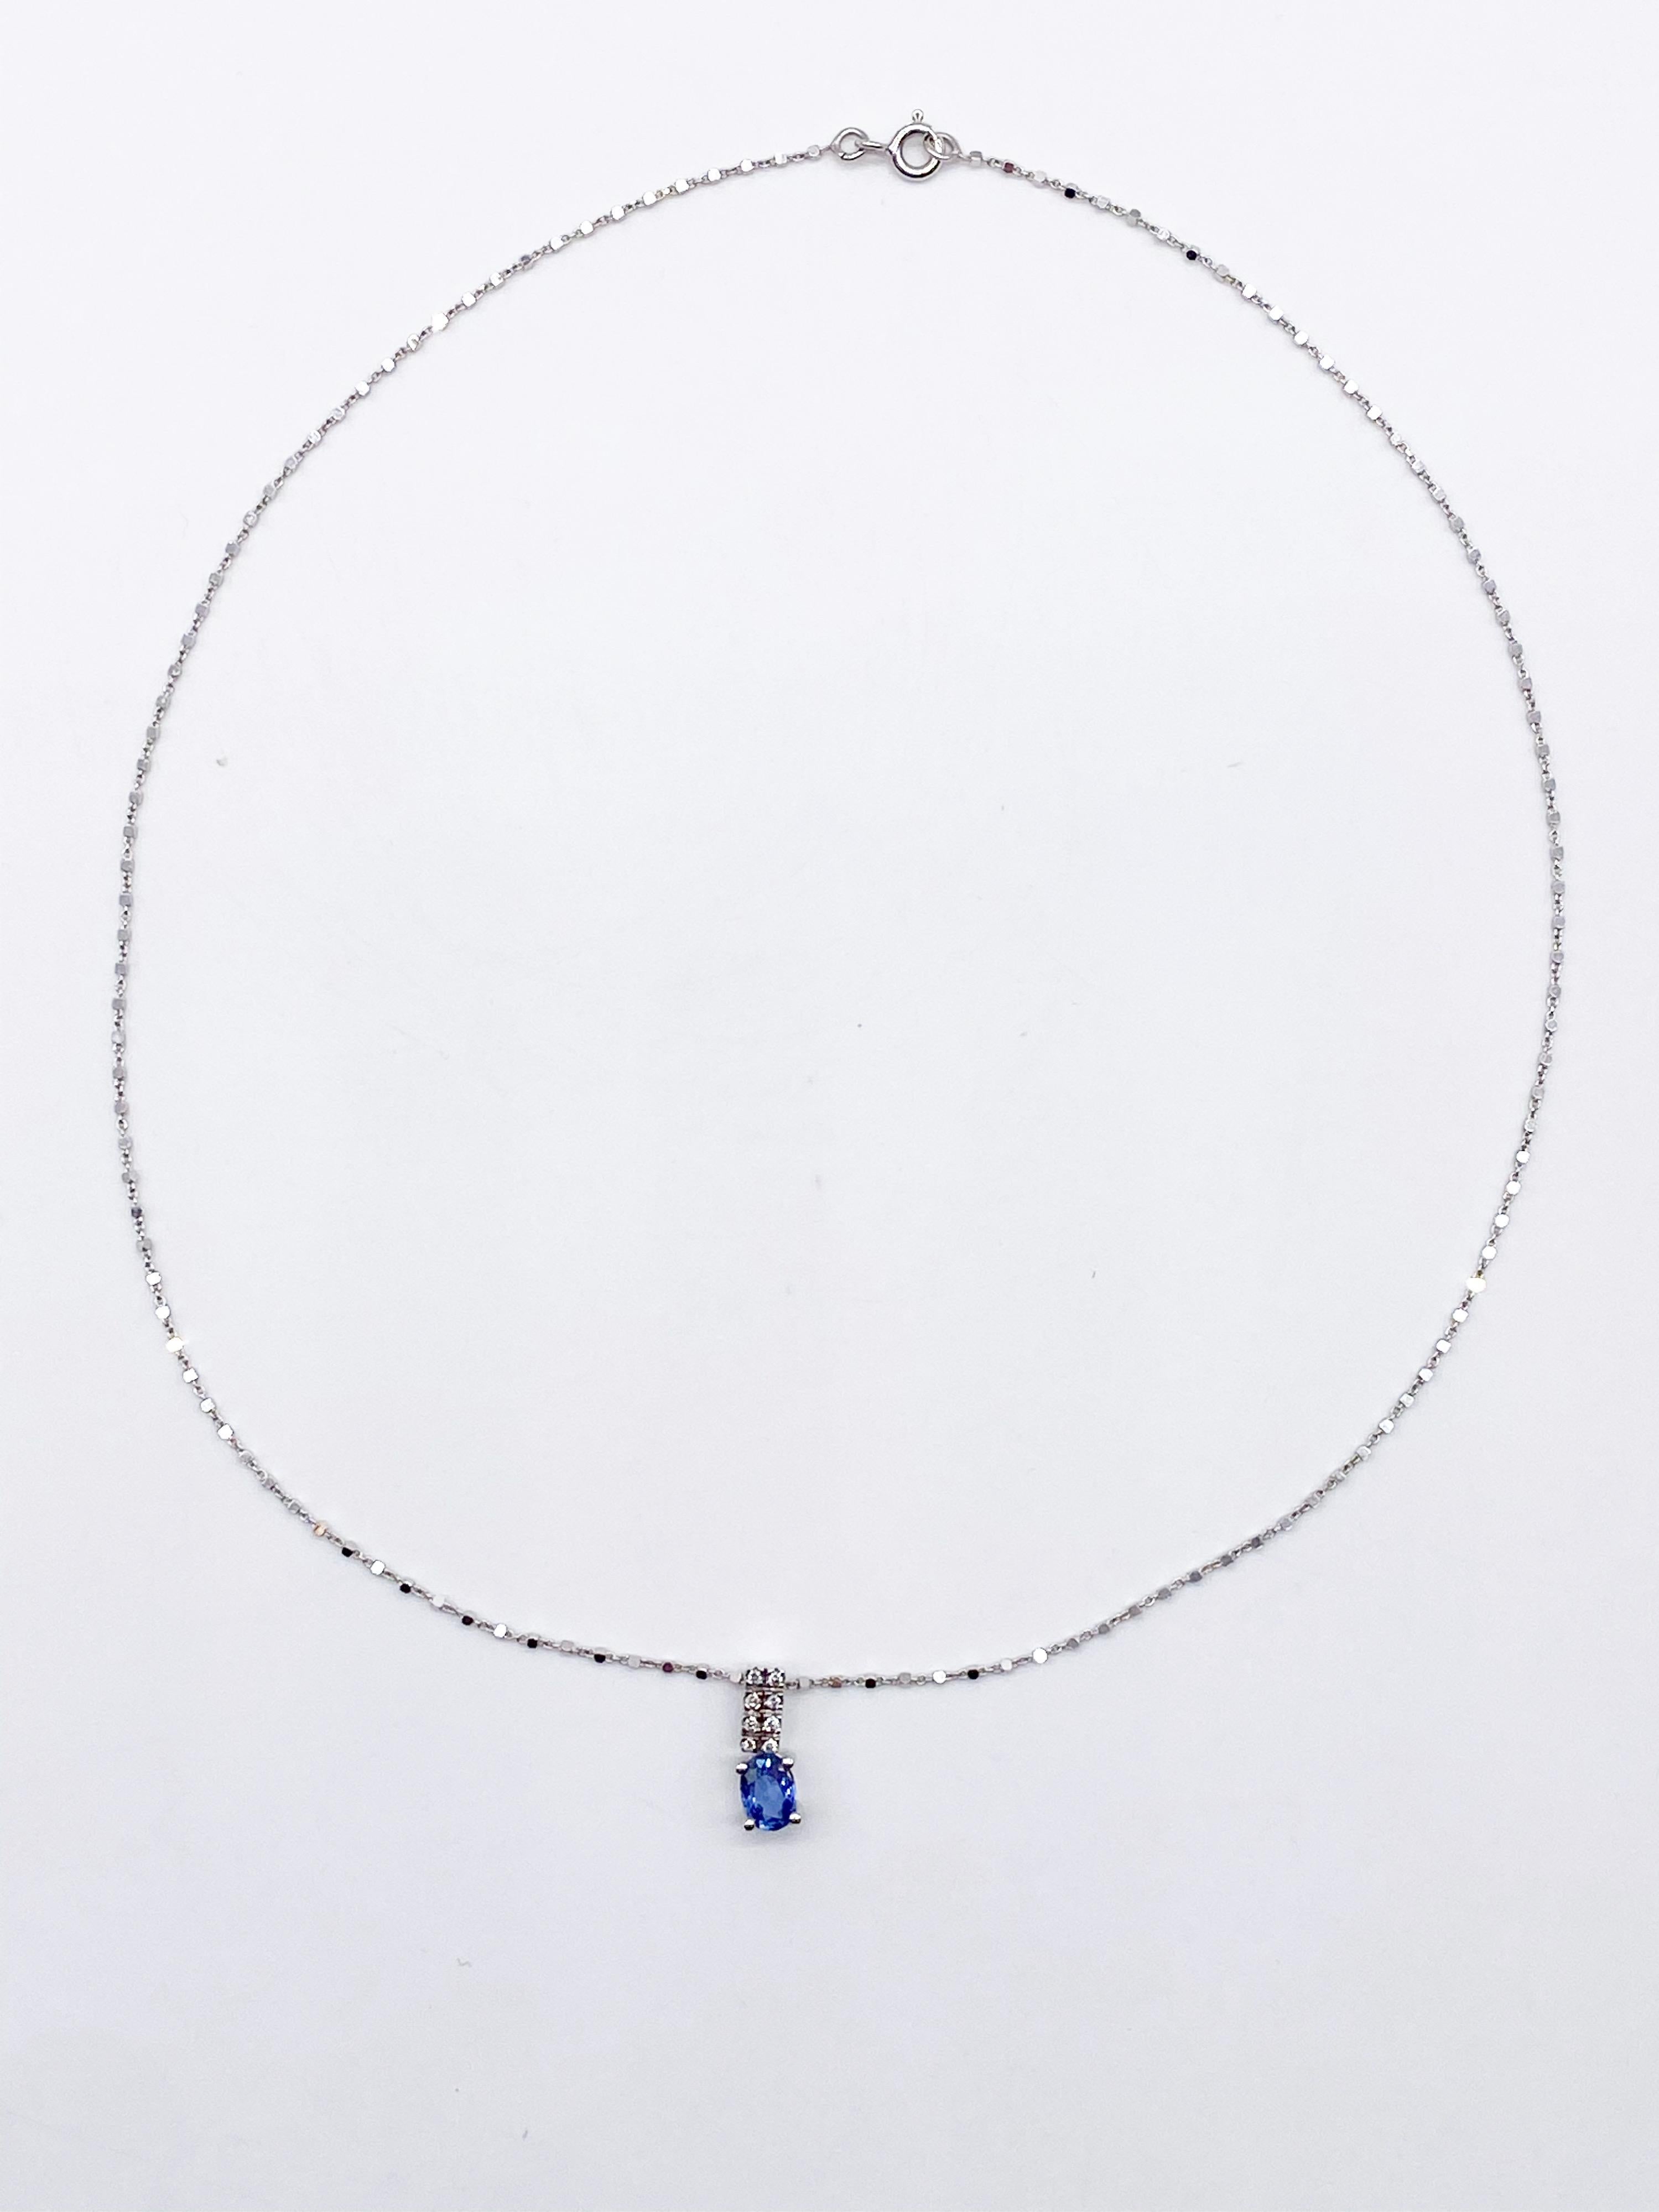 Diamond and Sapphire Necklace White Gold 18 Karat  For Sale 2